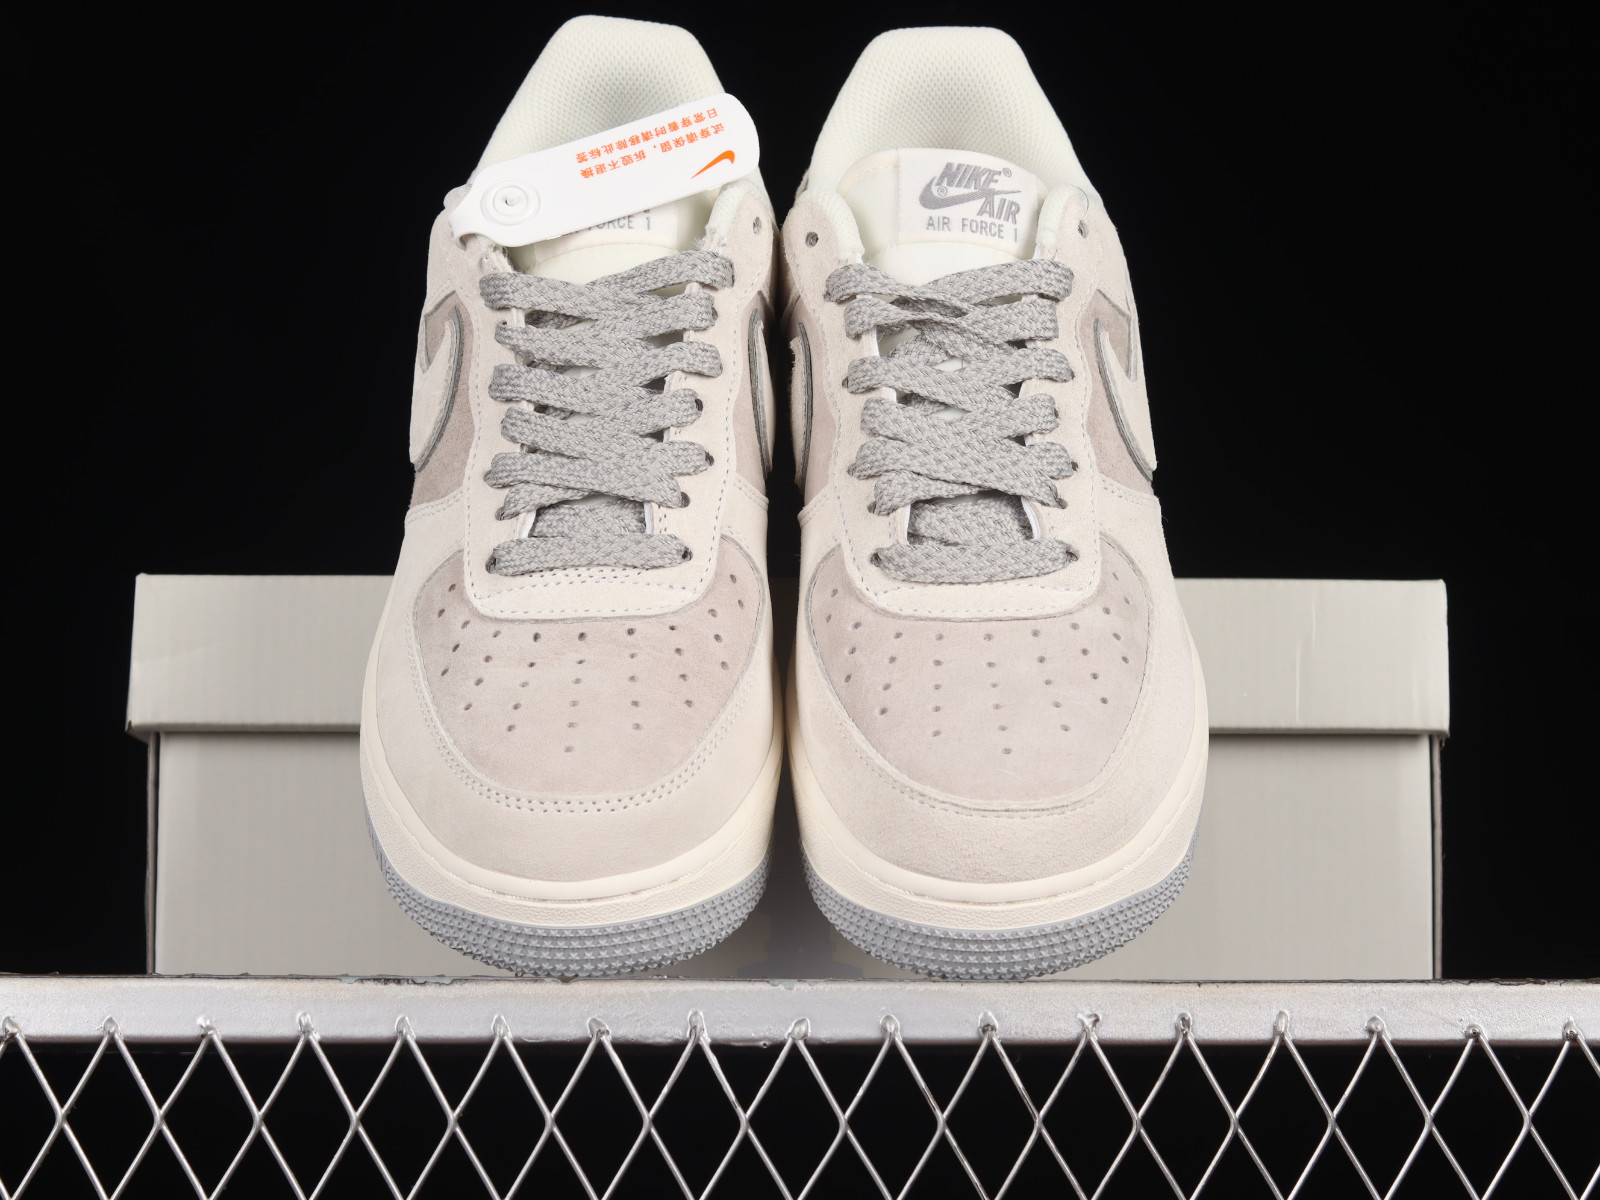 plaats Voor type Celsius nike air tech challenge 2 french open schedule - MultiscaleconsultingShops  - 005 - Nike Air Force 1 07 Low Four Horsemen PE Suede Dark Grey White  DZ3696